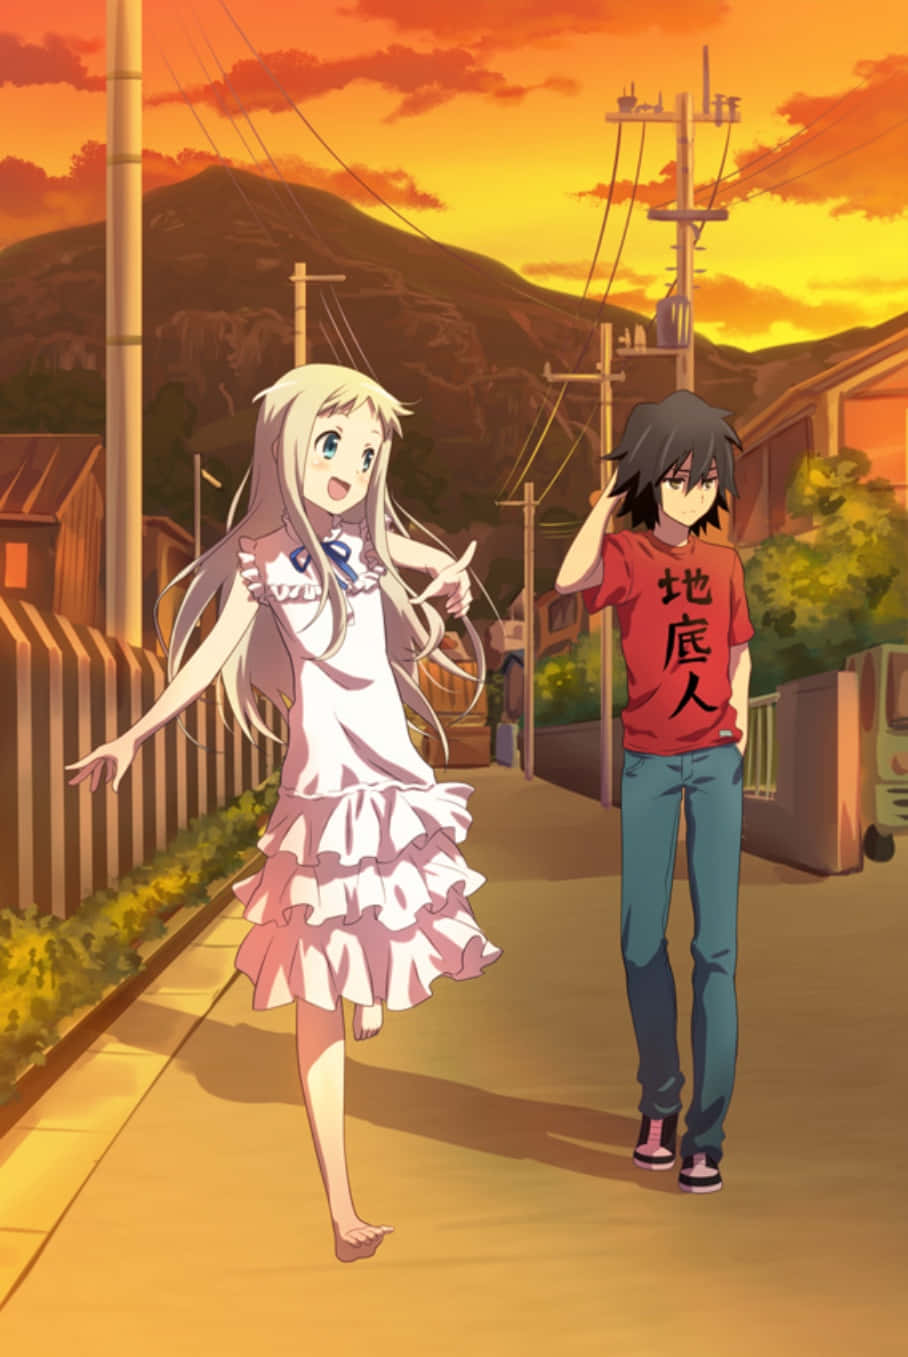 A Girl And Boy Walking Down A Street At Sunset